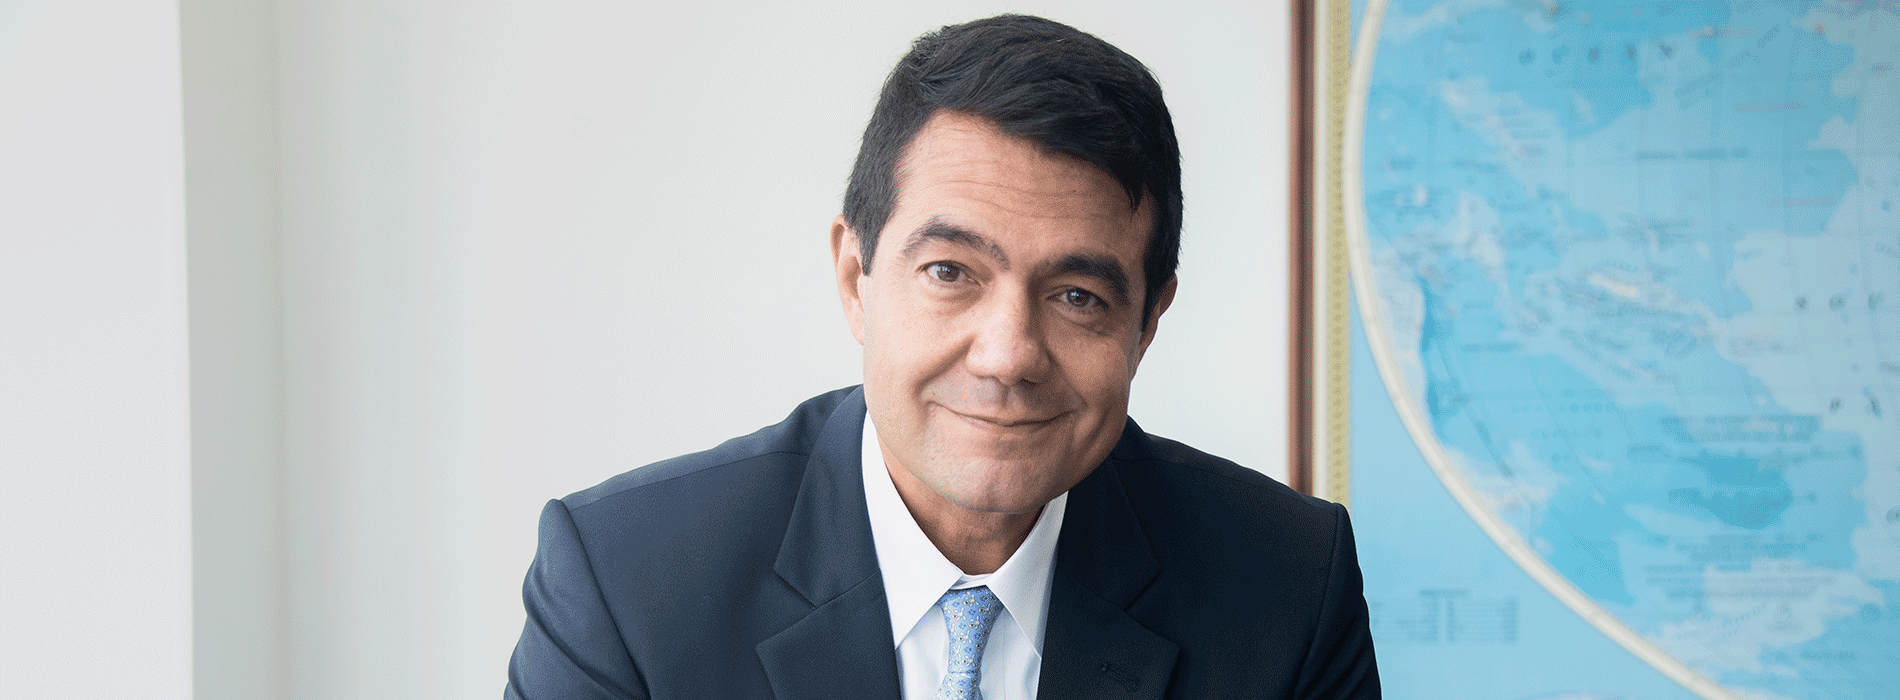 Meet Julio Puentes Montaño, new Vice President of Investment at ProColombia